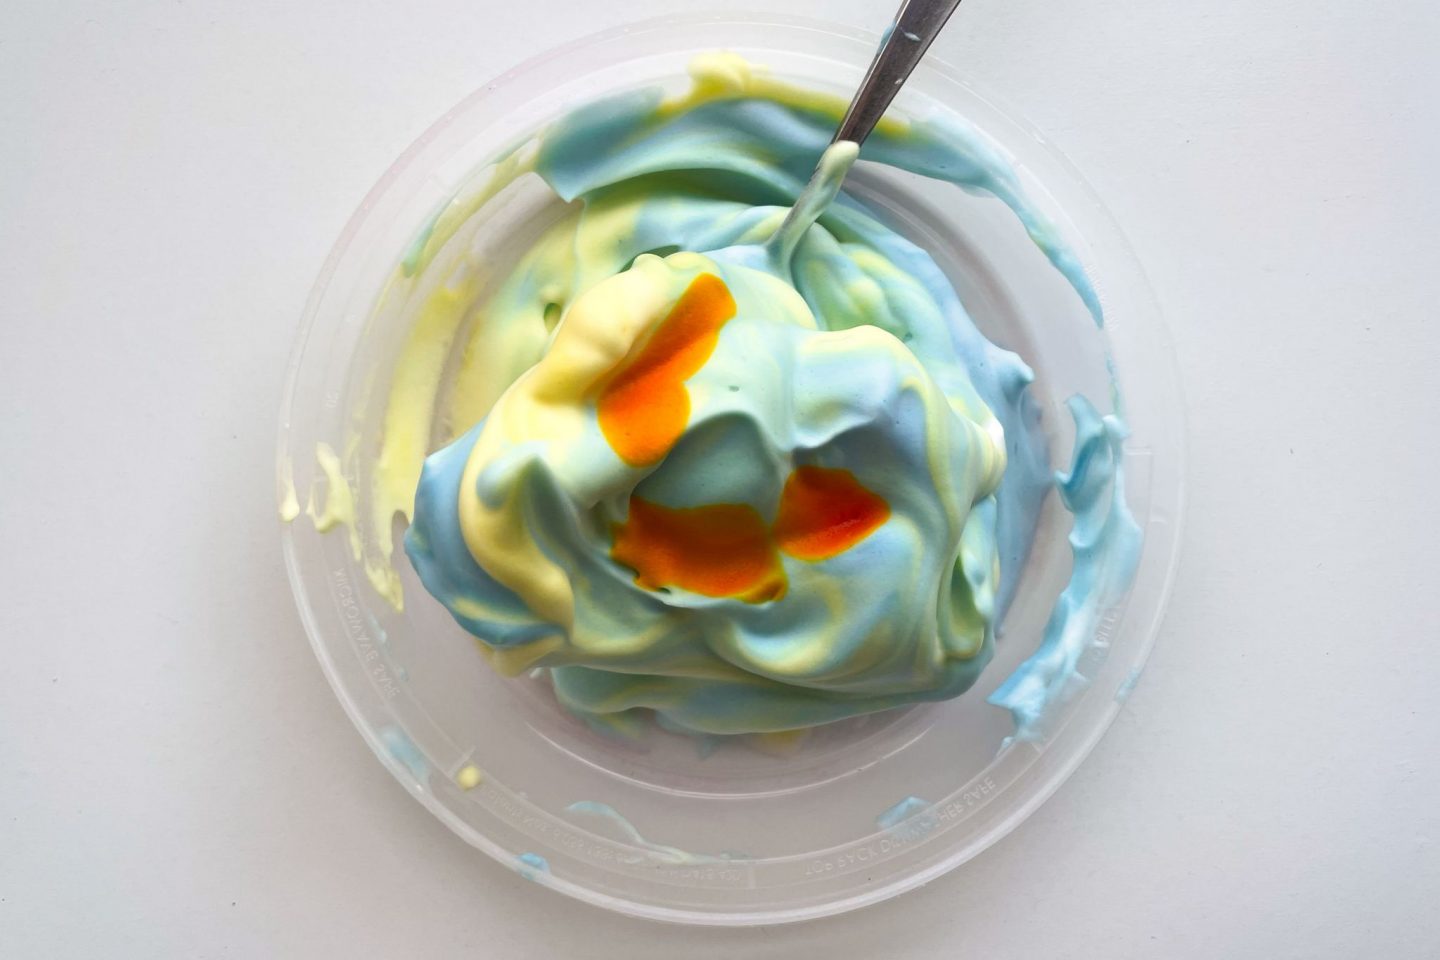 Using shaving cream and food dye to teach children about color theory